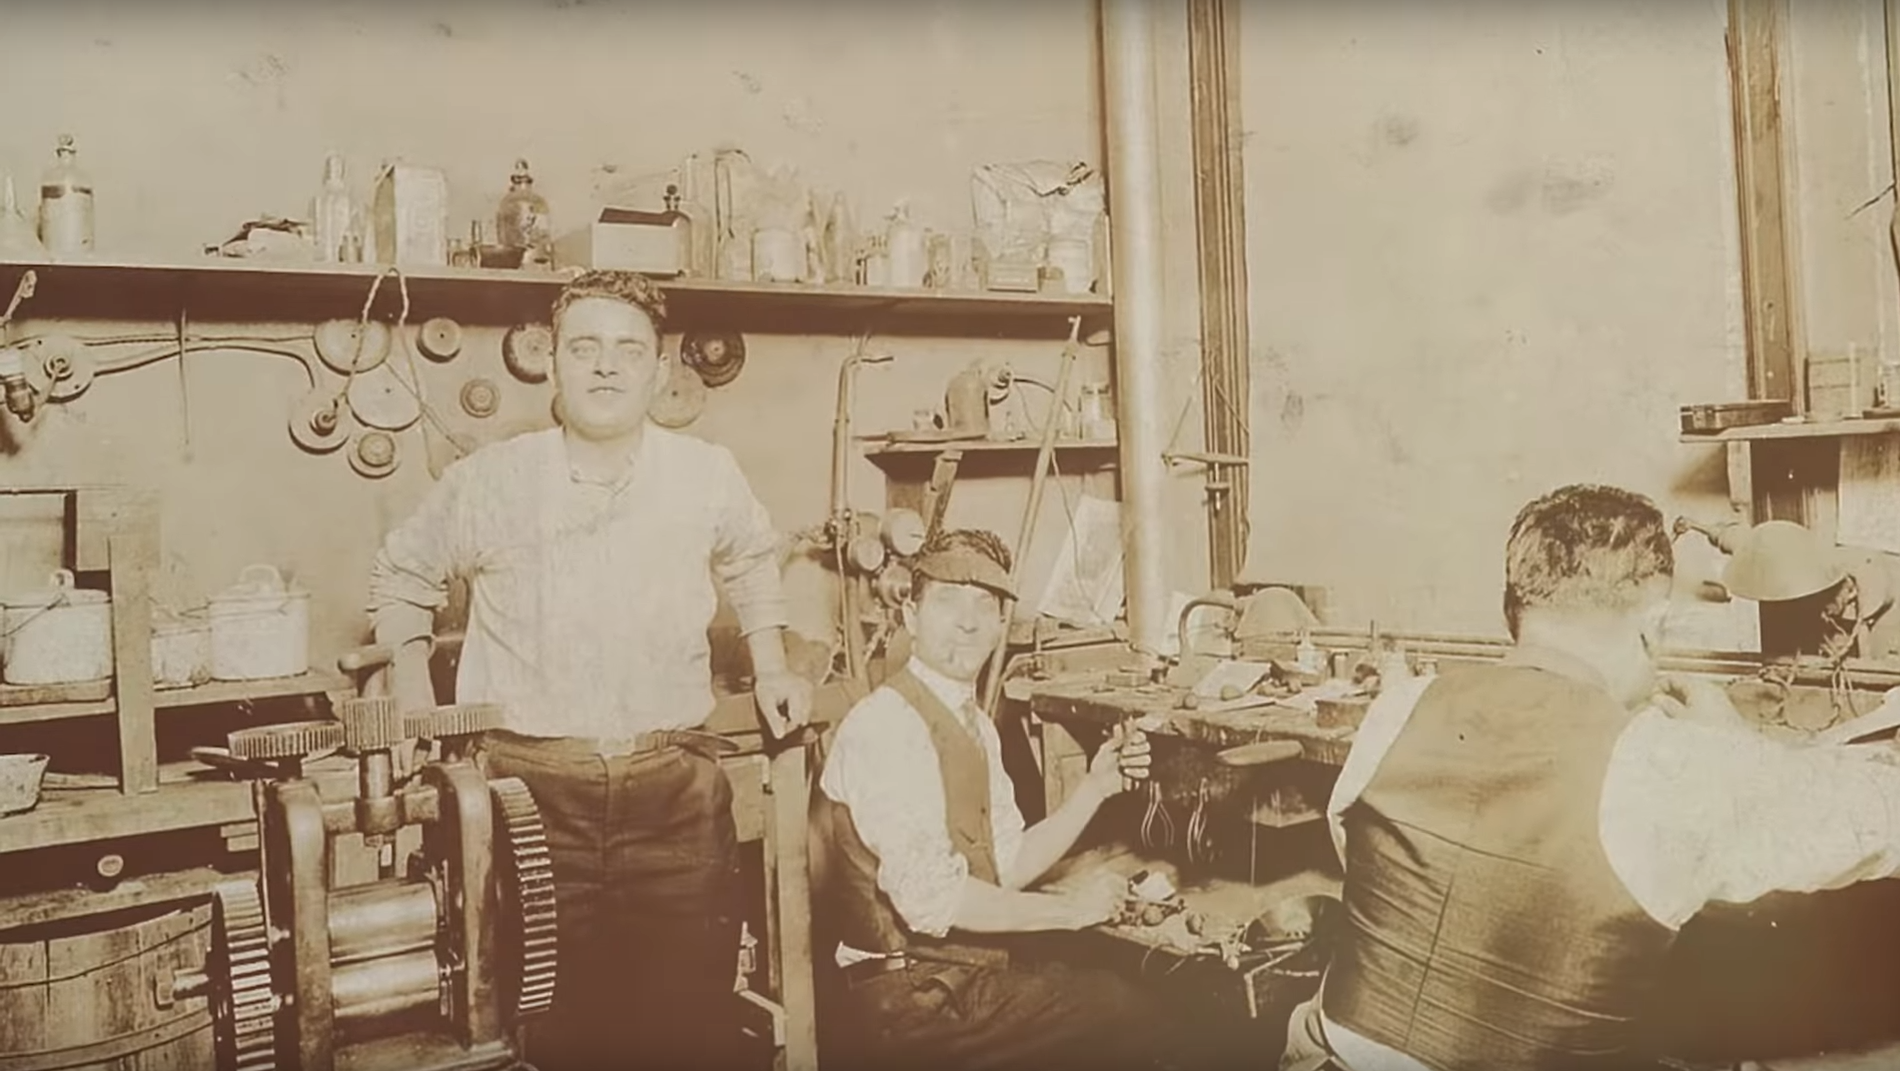 Jewelers from the Lampert Family working in an early 1900s workshop in Chicago.